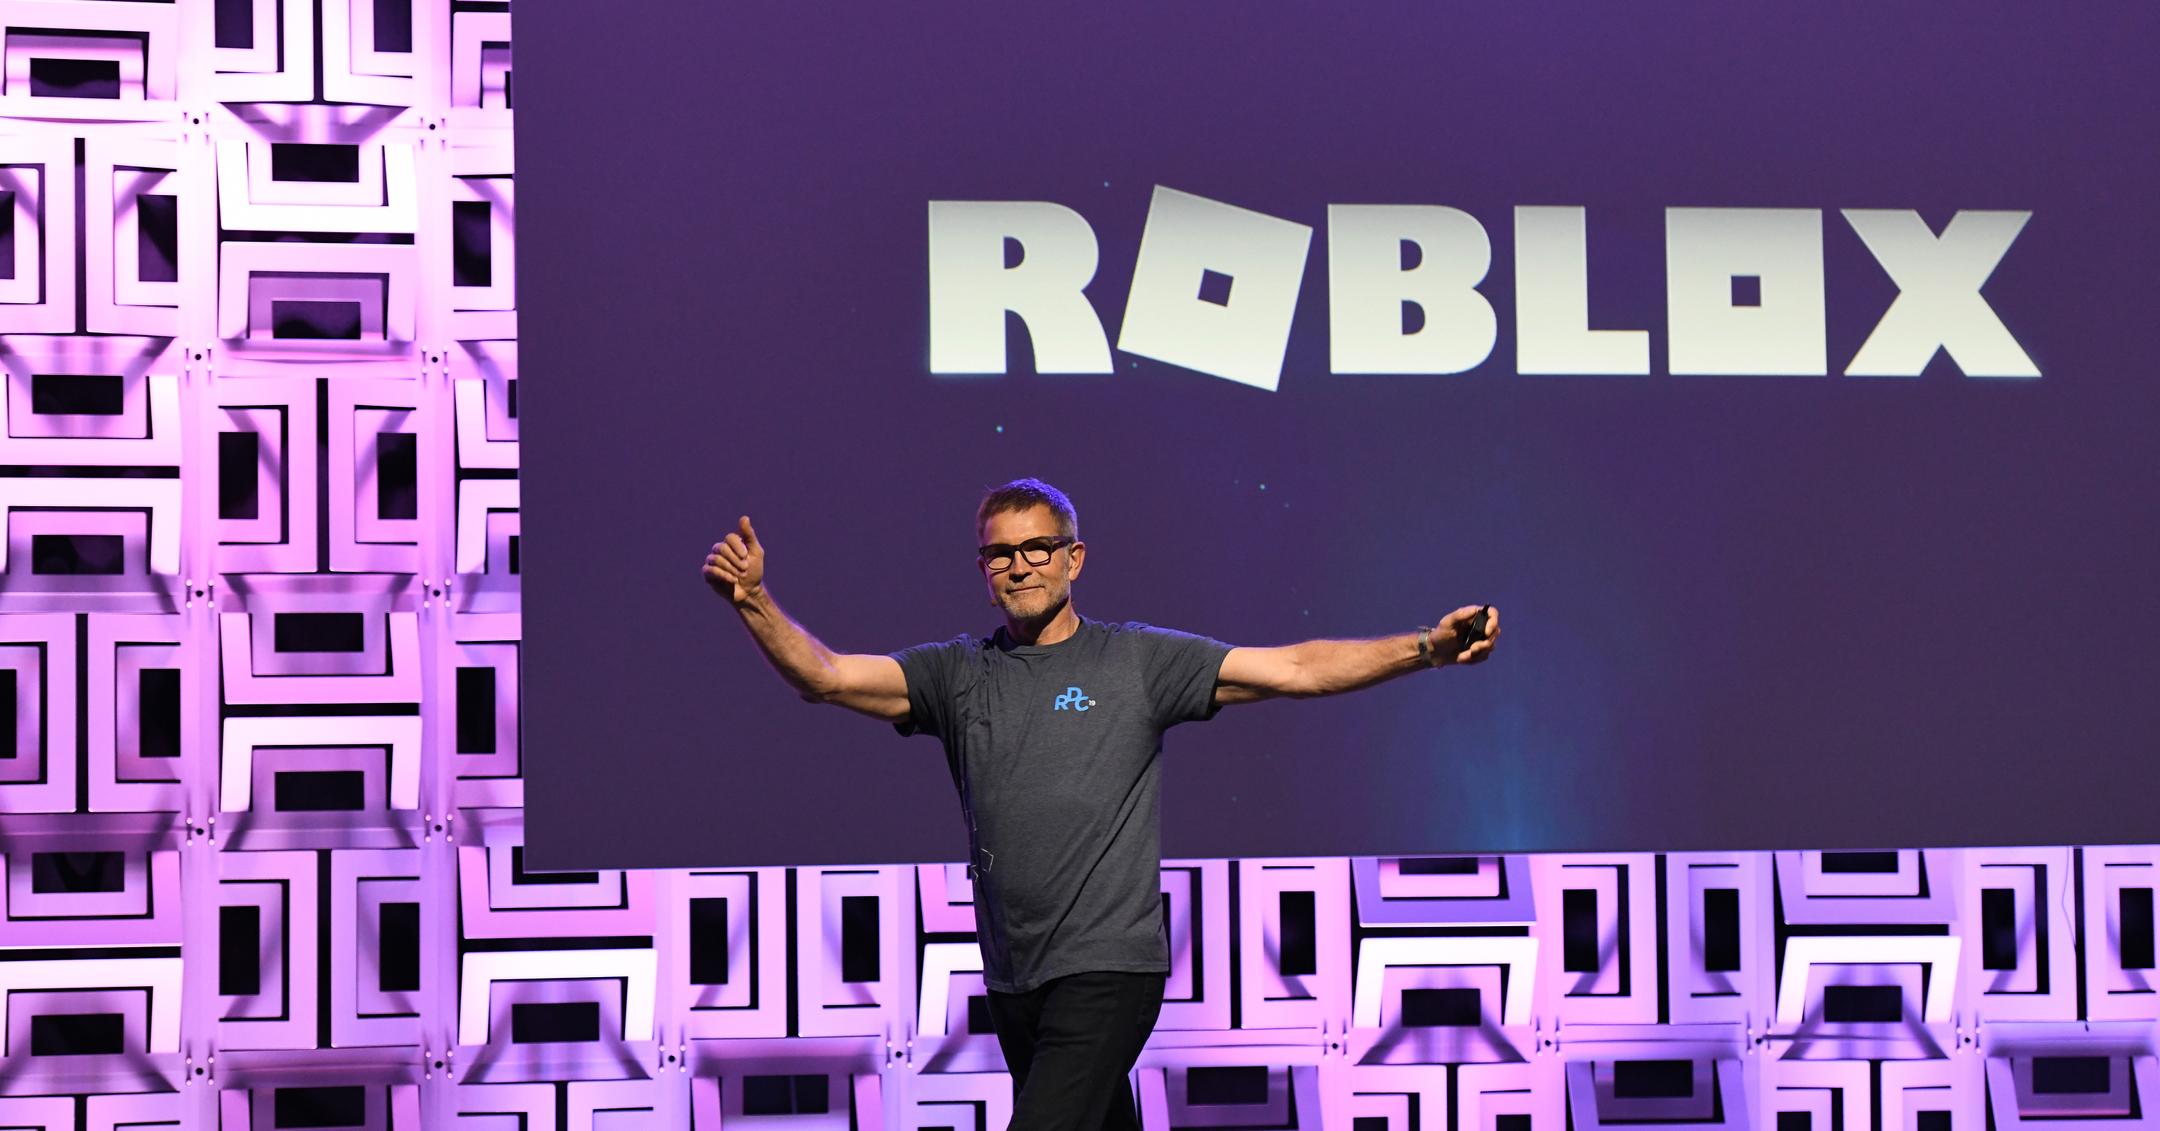 When Is The Roblox Ipo Date - sources roblox ipo